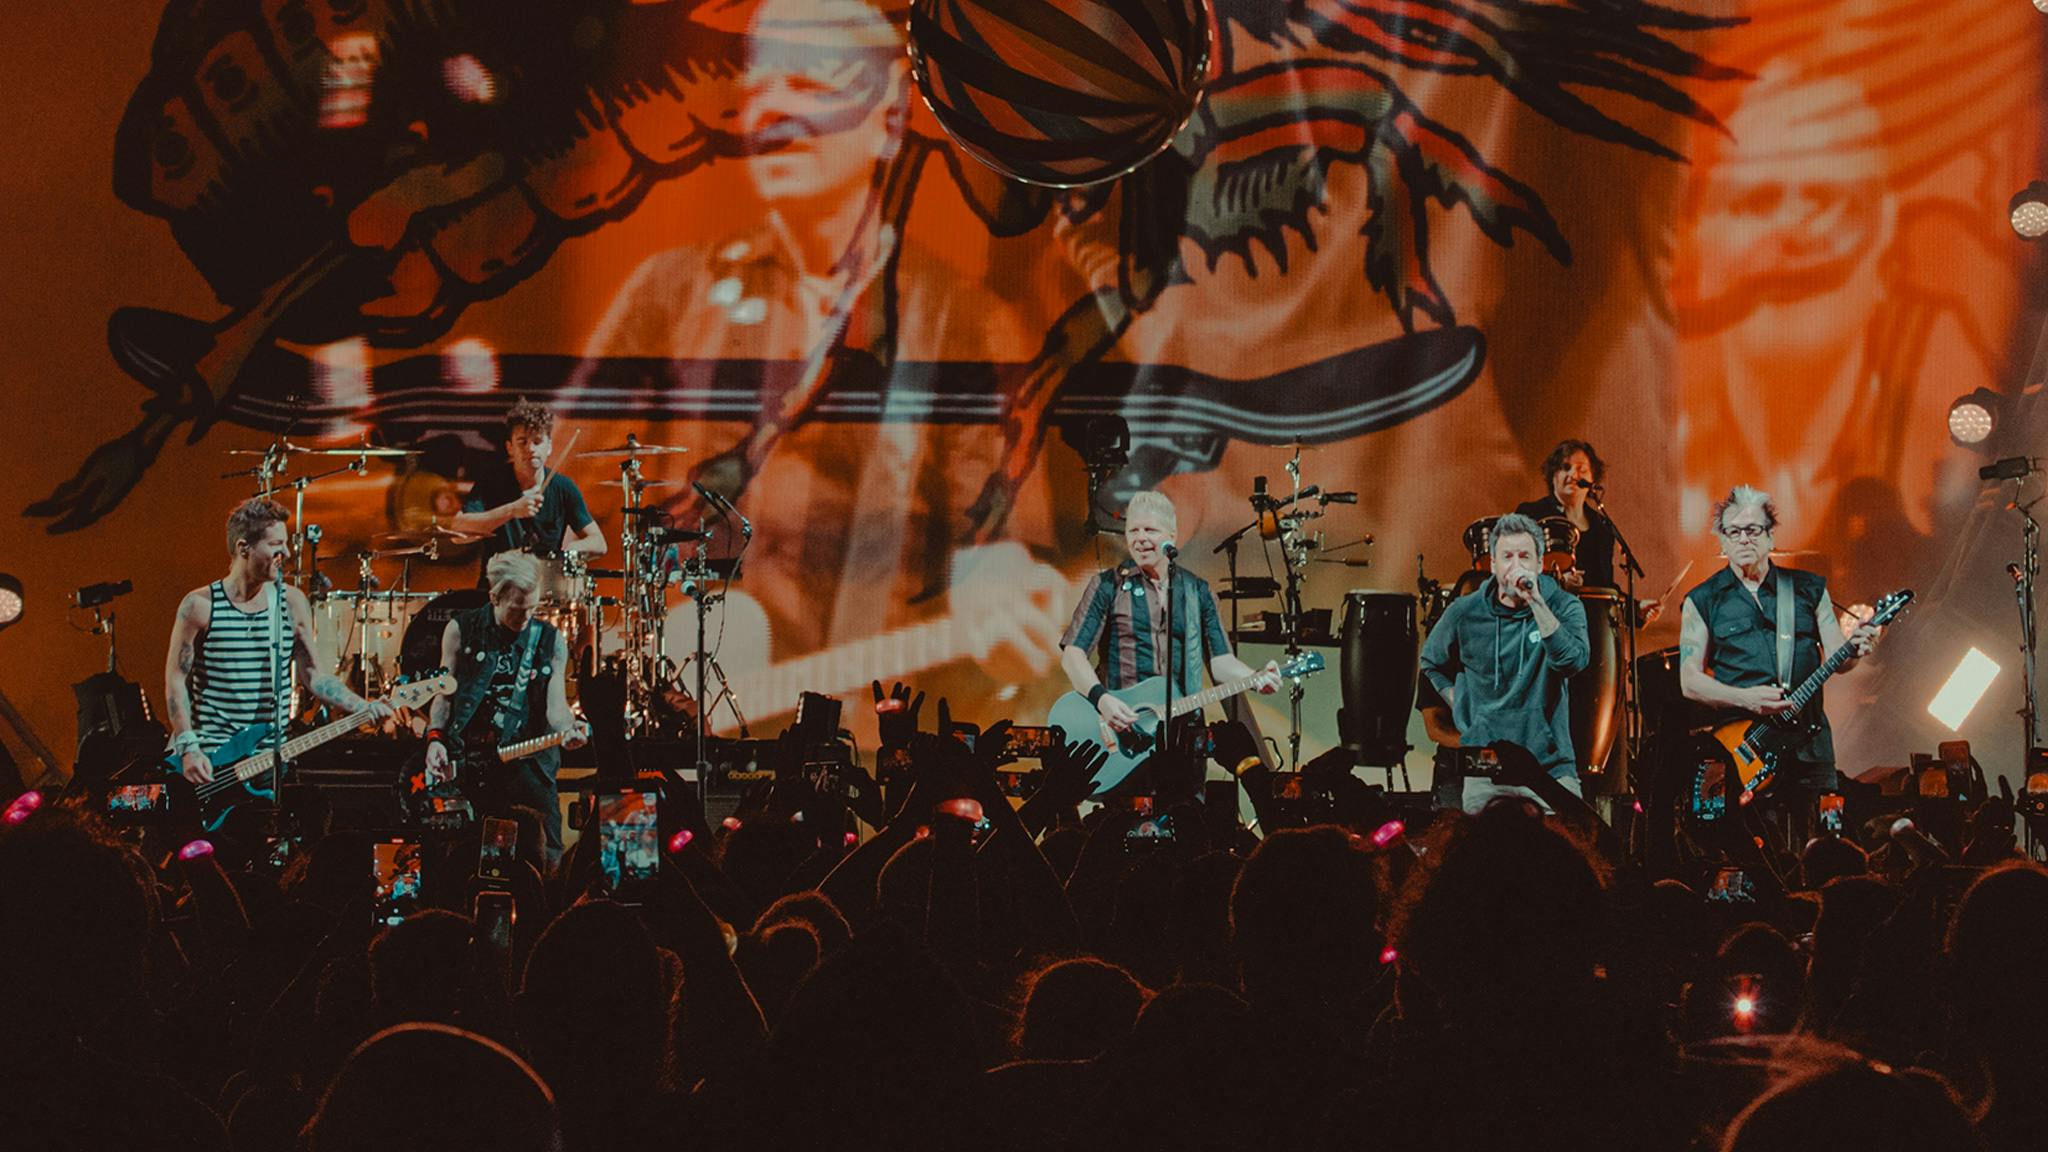 Watch The Offspring perform Why Don’t You Get A Job? with Deryck Whibley and Pierre Bouvier